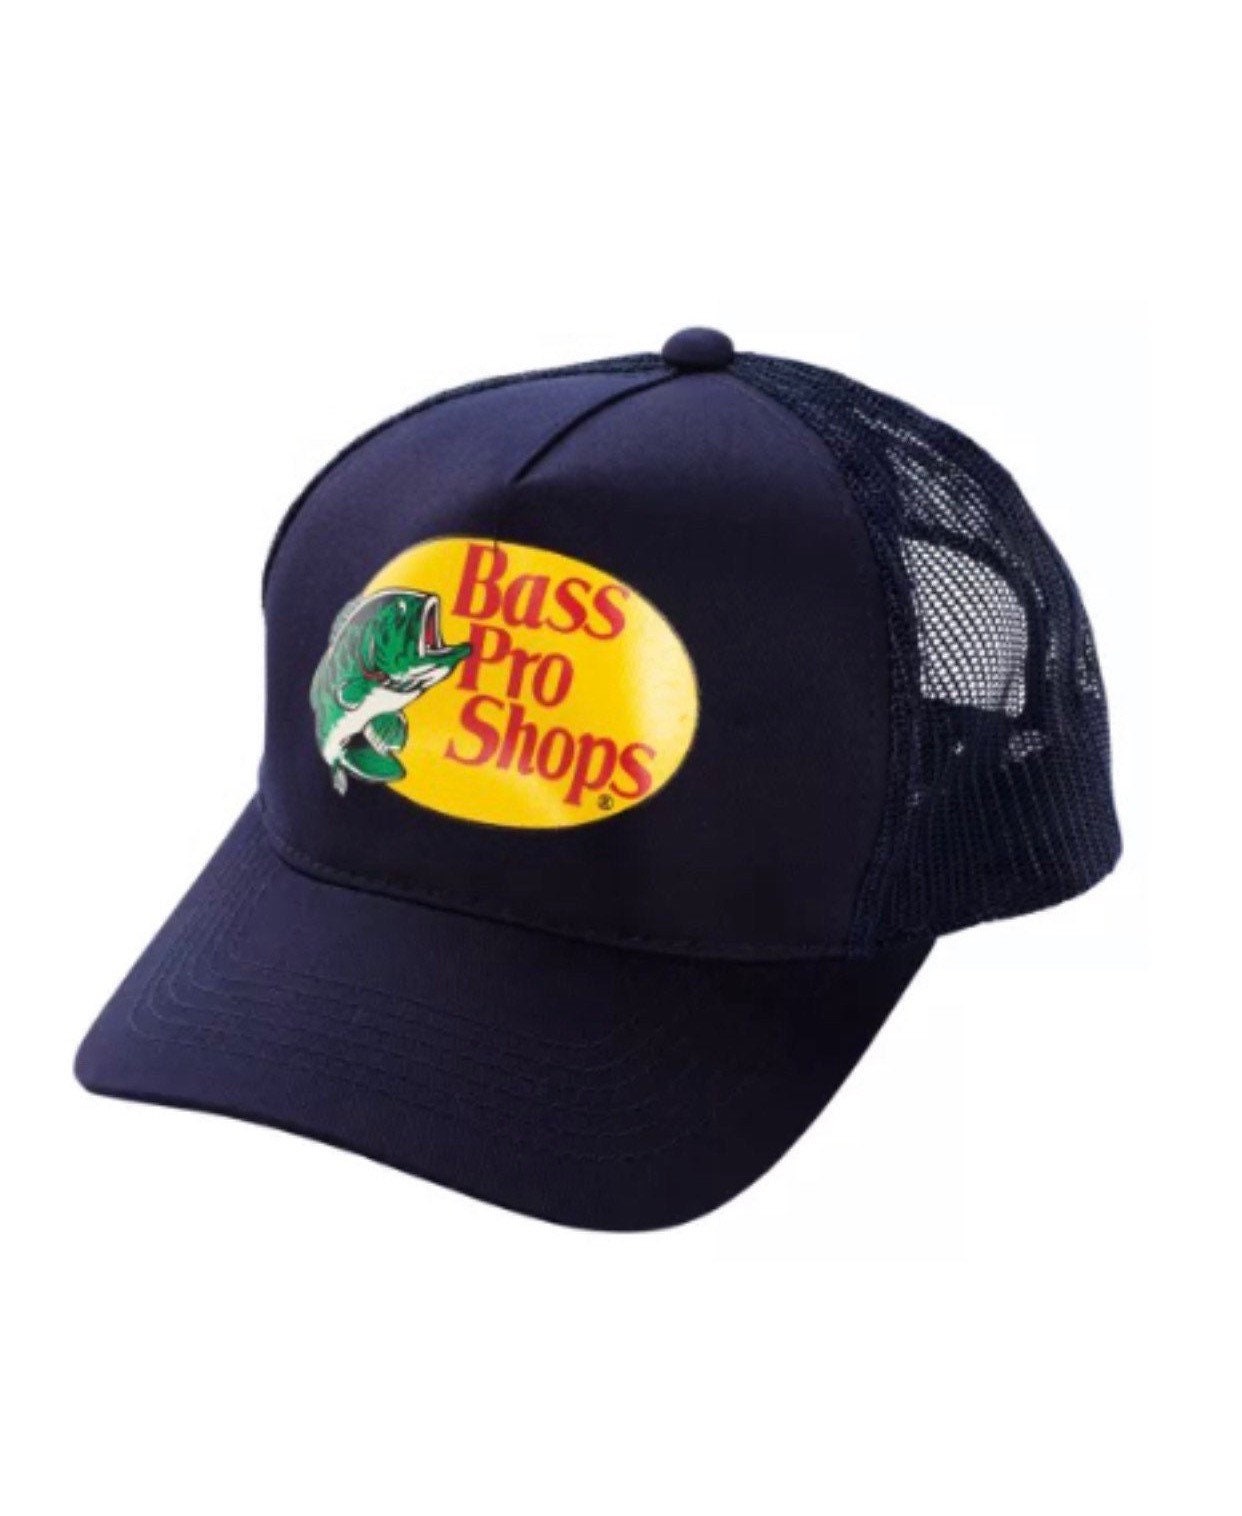 Brand New Bass Pro Shops Mesh Trucker Hat NAVY BLUE Ships Within 24 Hours 